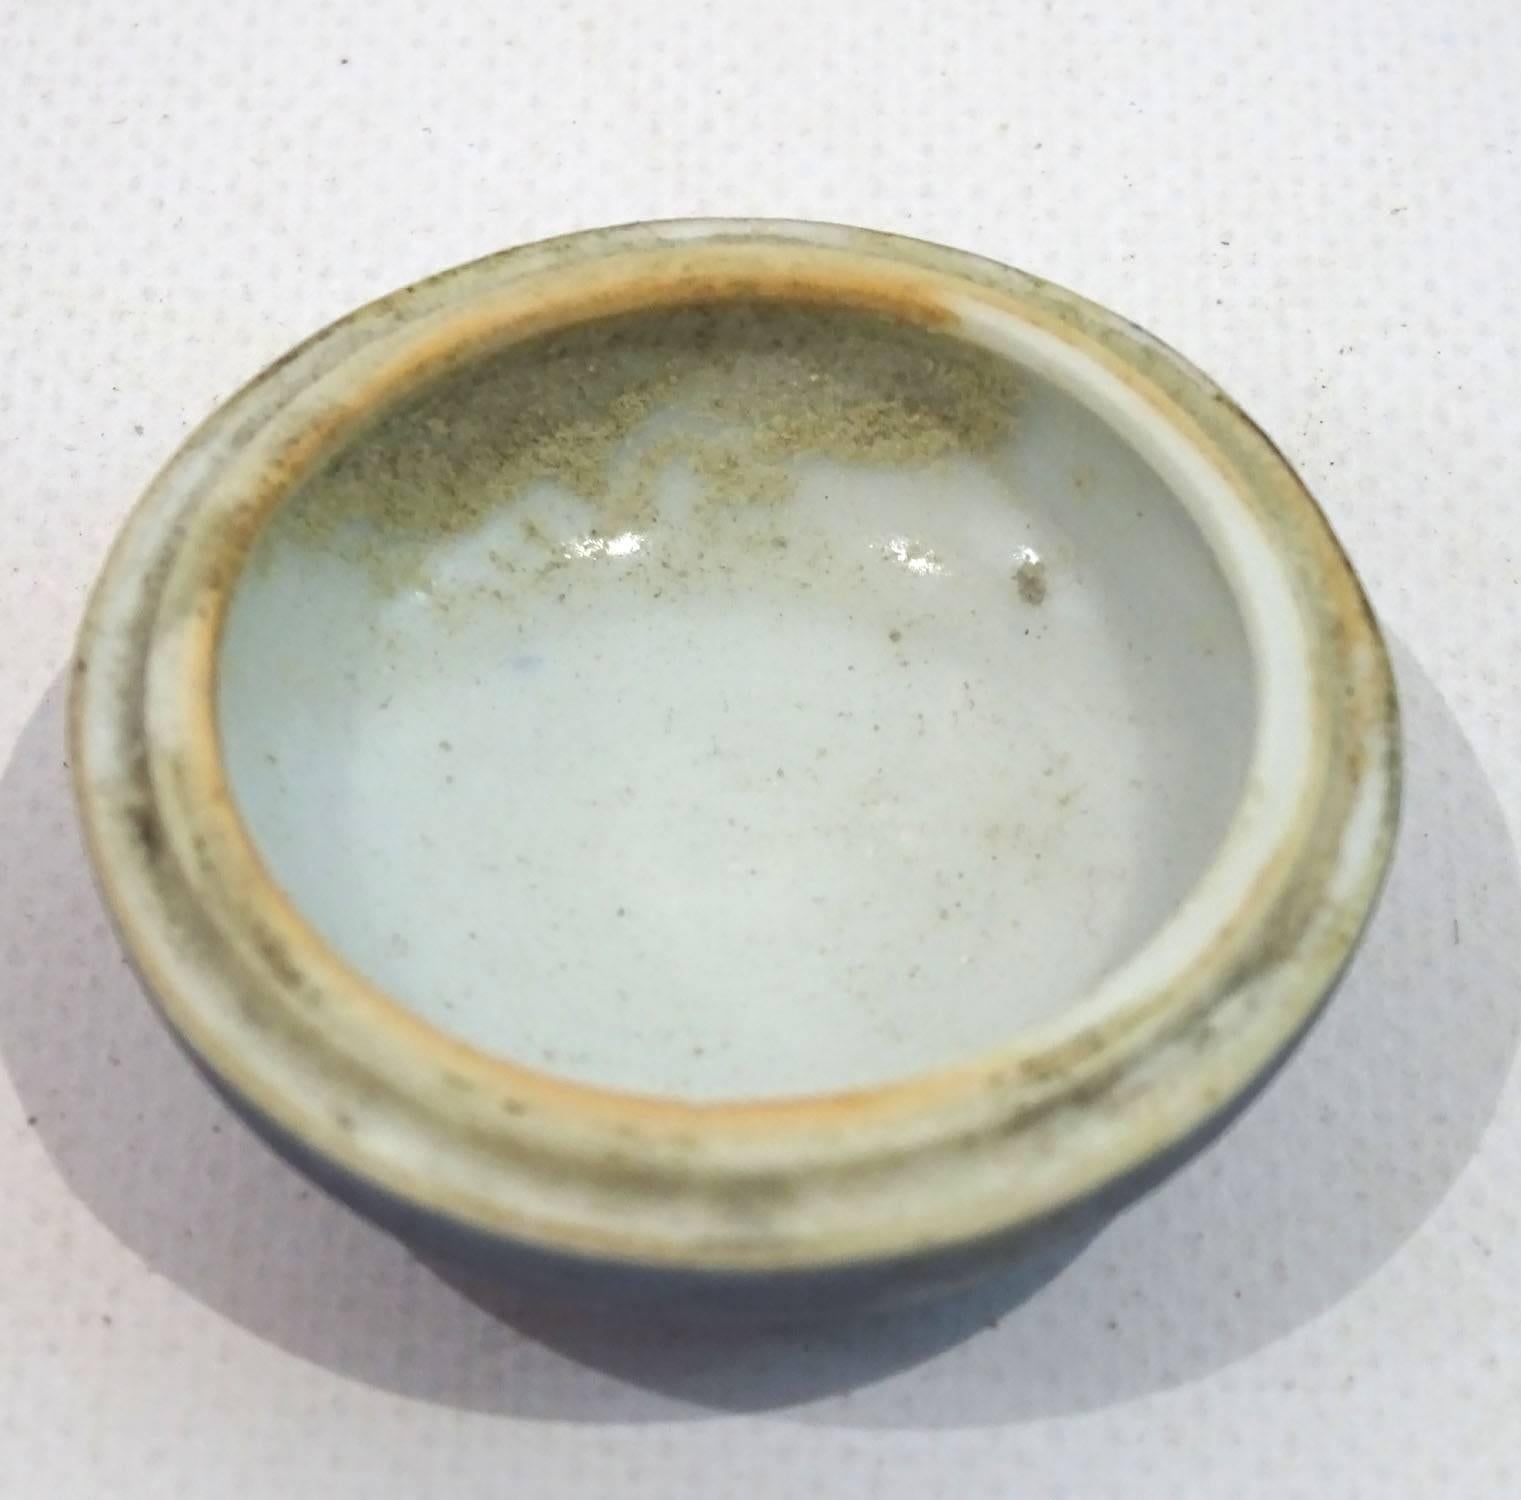 17th Century Chinese Porcelain Cosmetic Jar with Lid from The Hatcher Collection 1